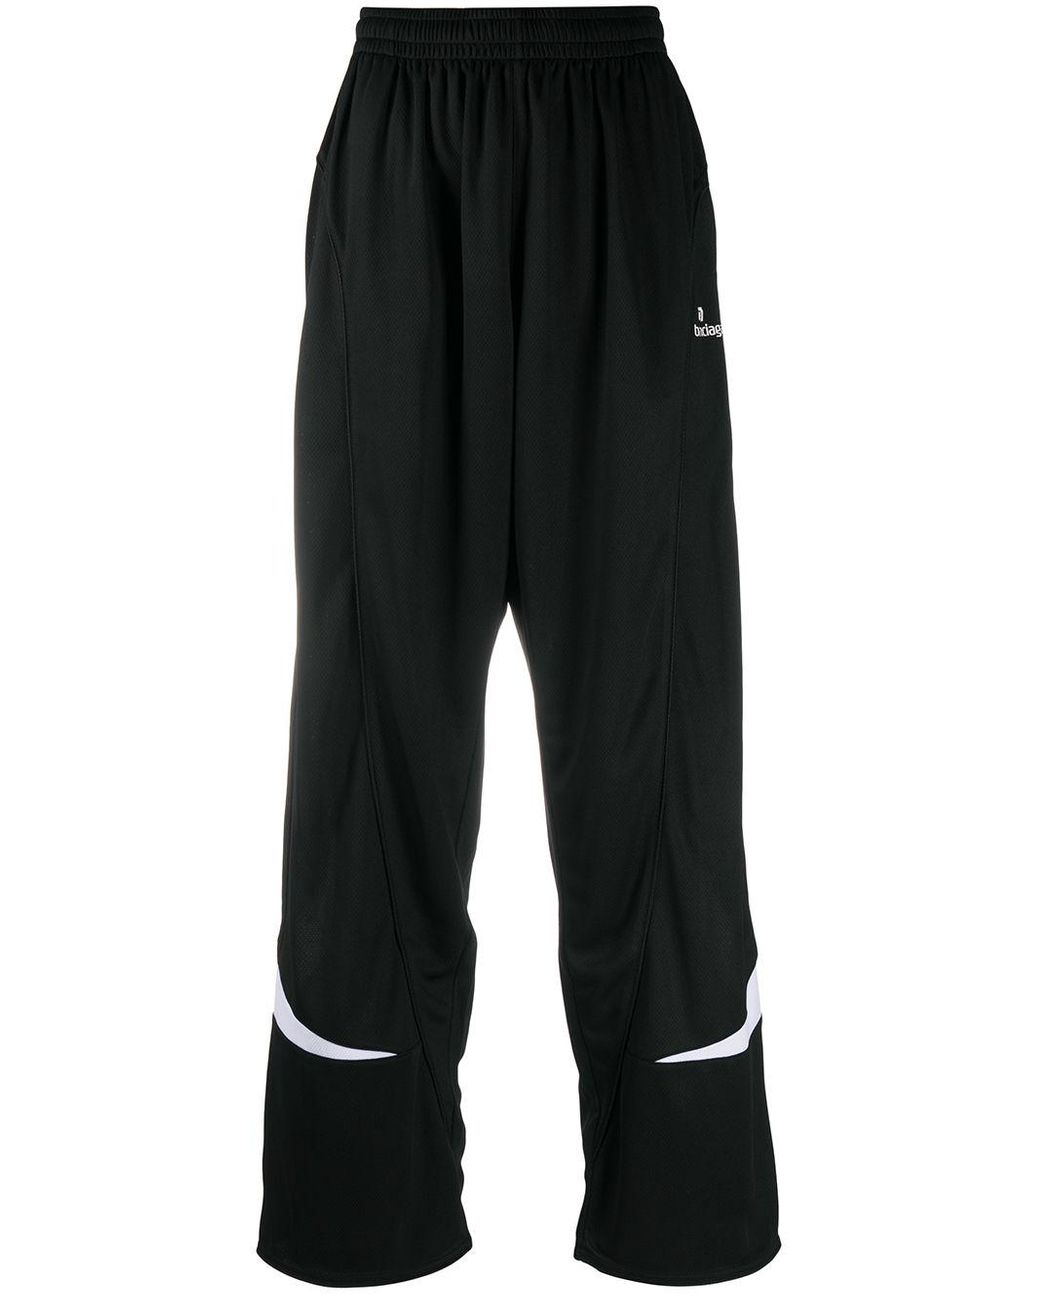 Balenciaga Synthetic Embroidered Logo Soccer Pants in Black - Lyst